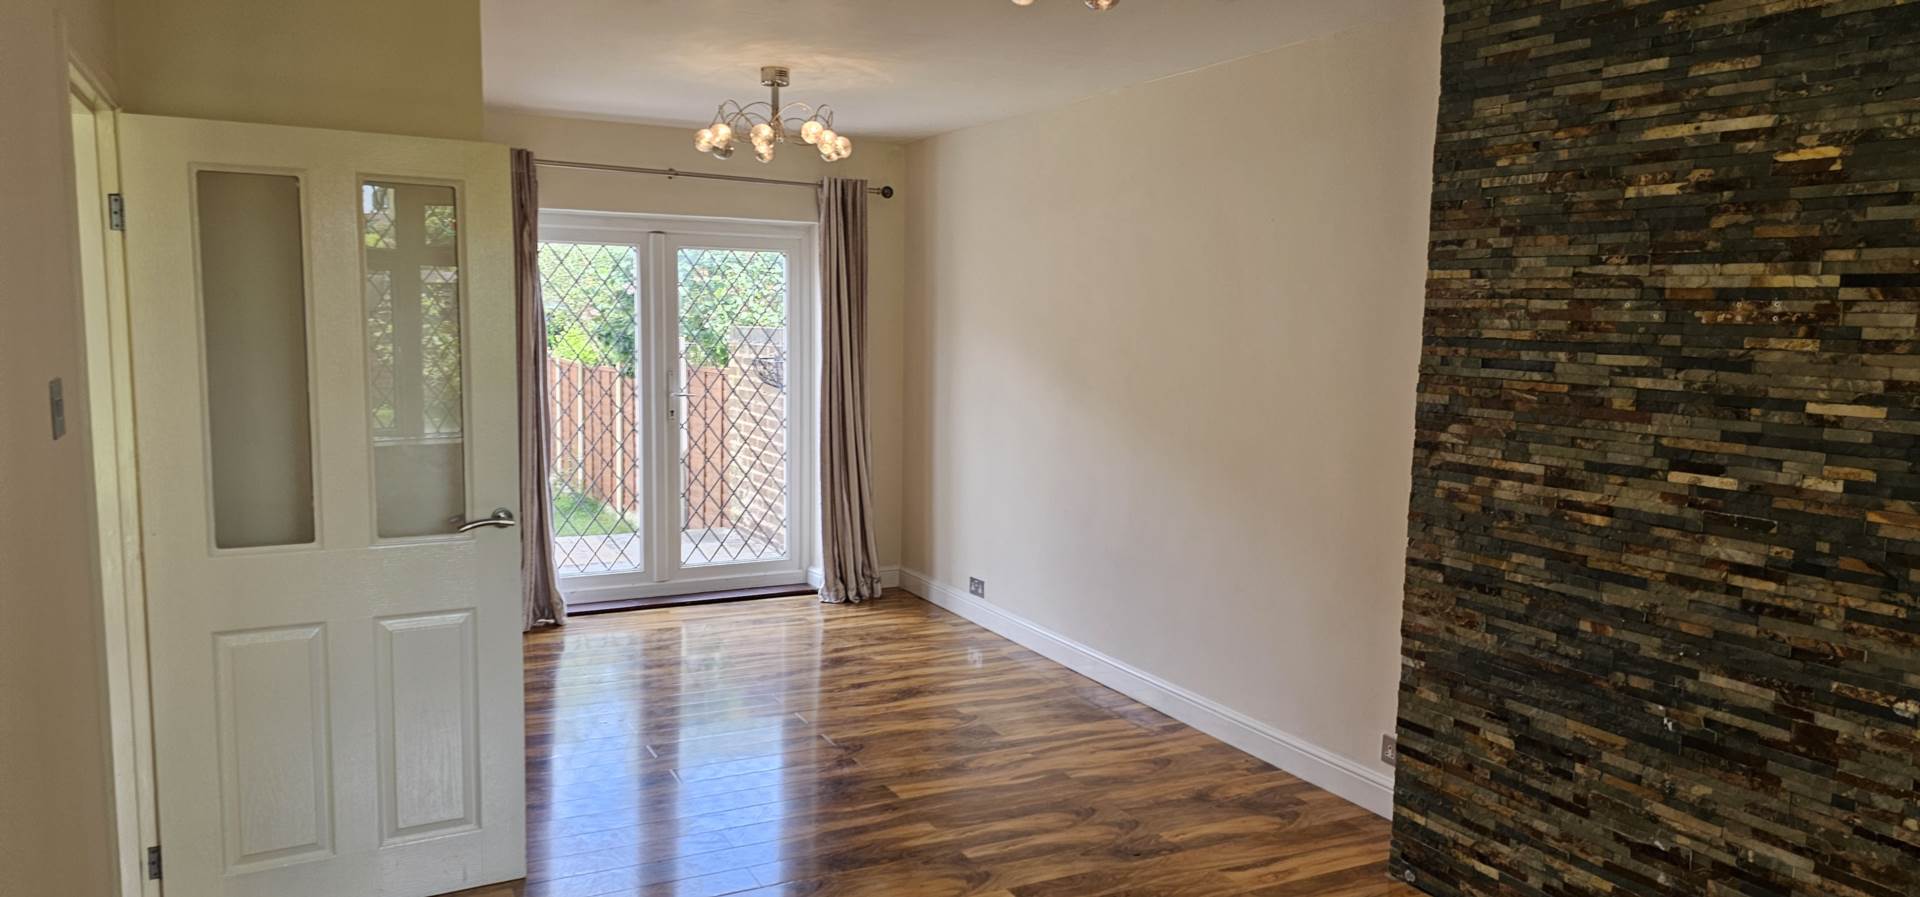 0 bed End Terraced House for rent in Birmingham. From Zenith Estate Agents